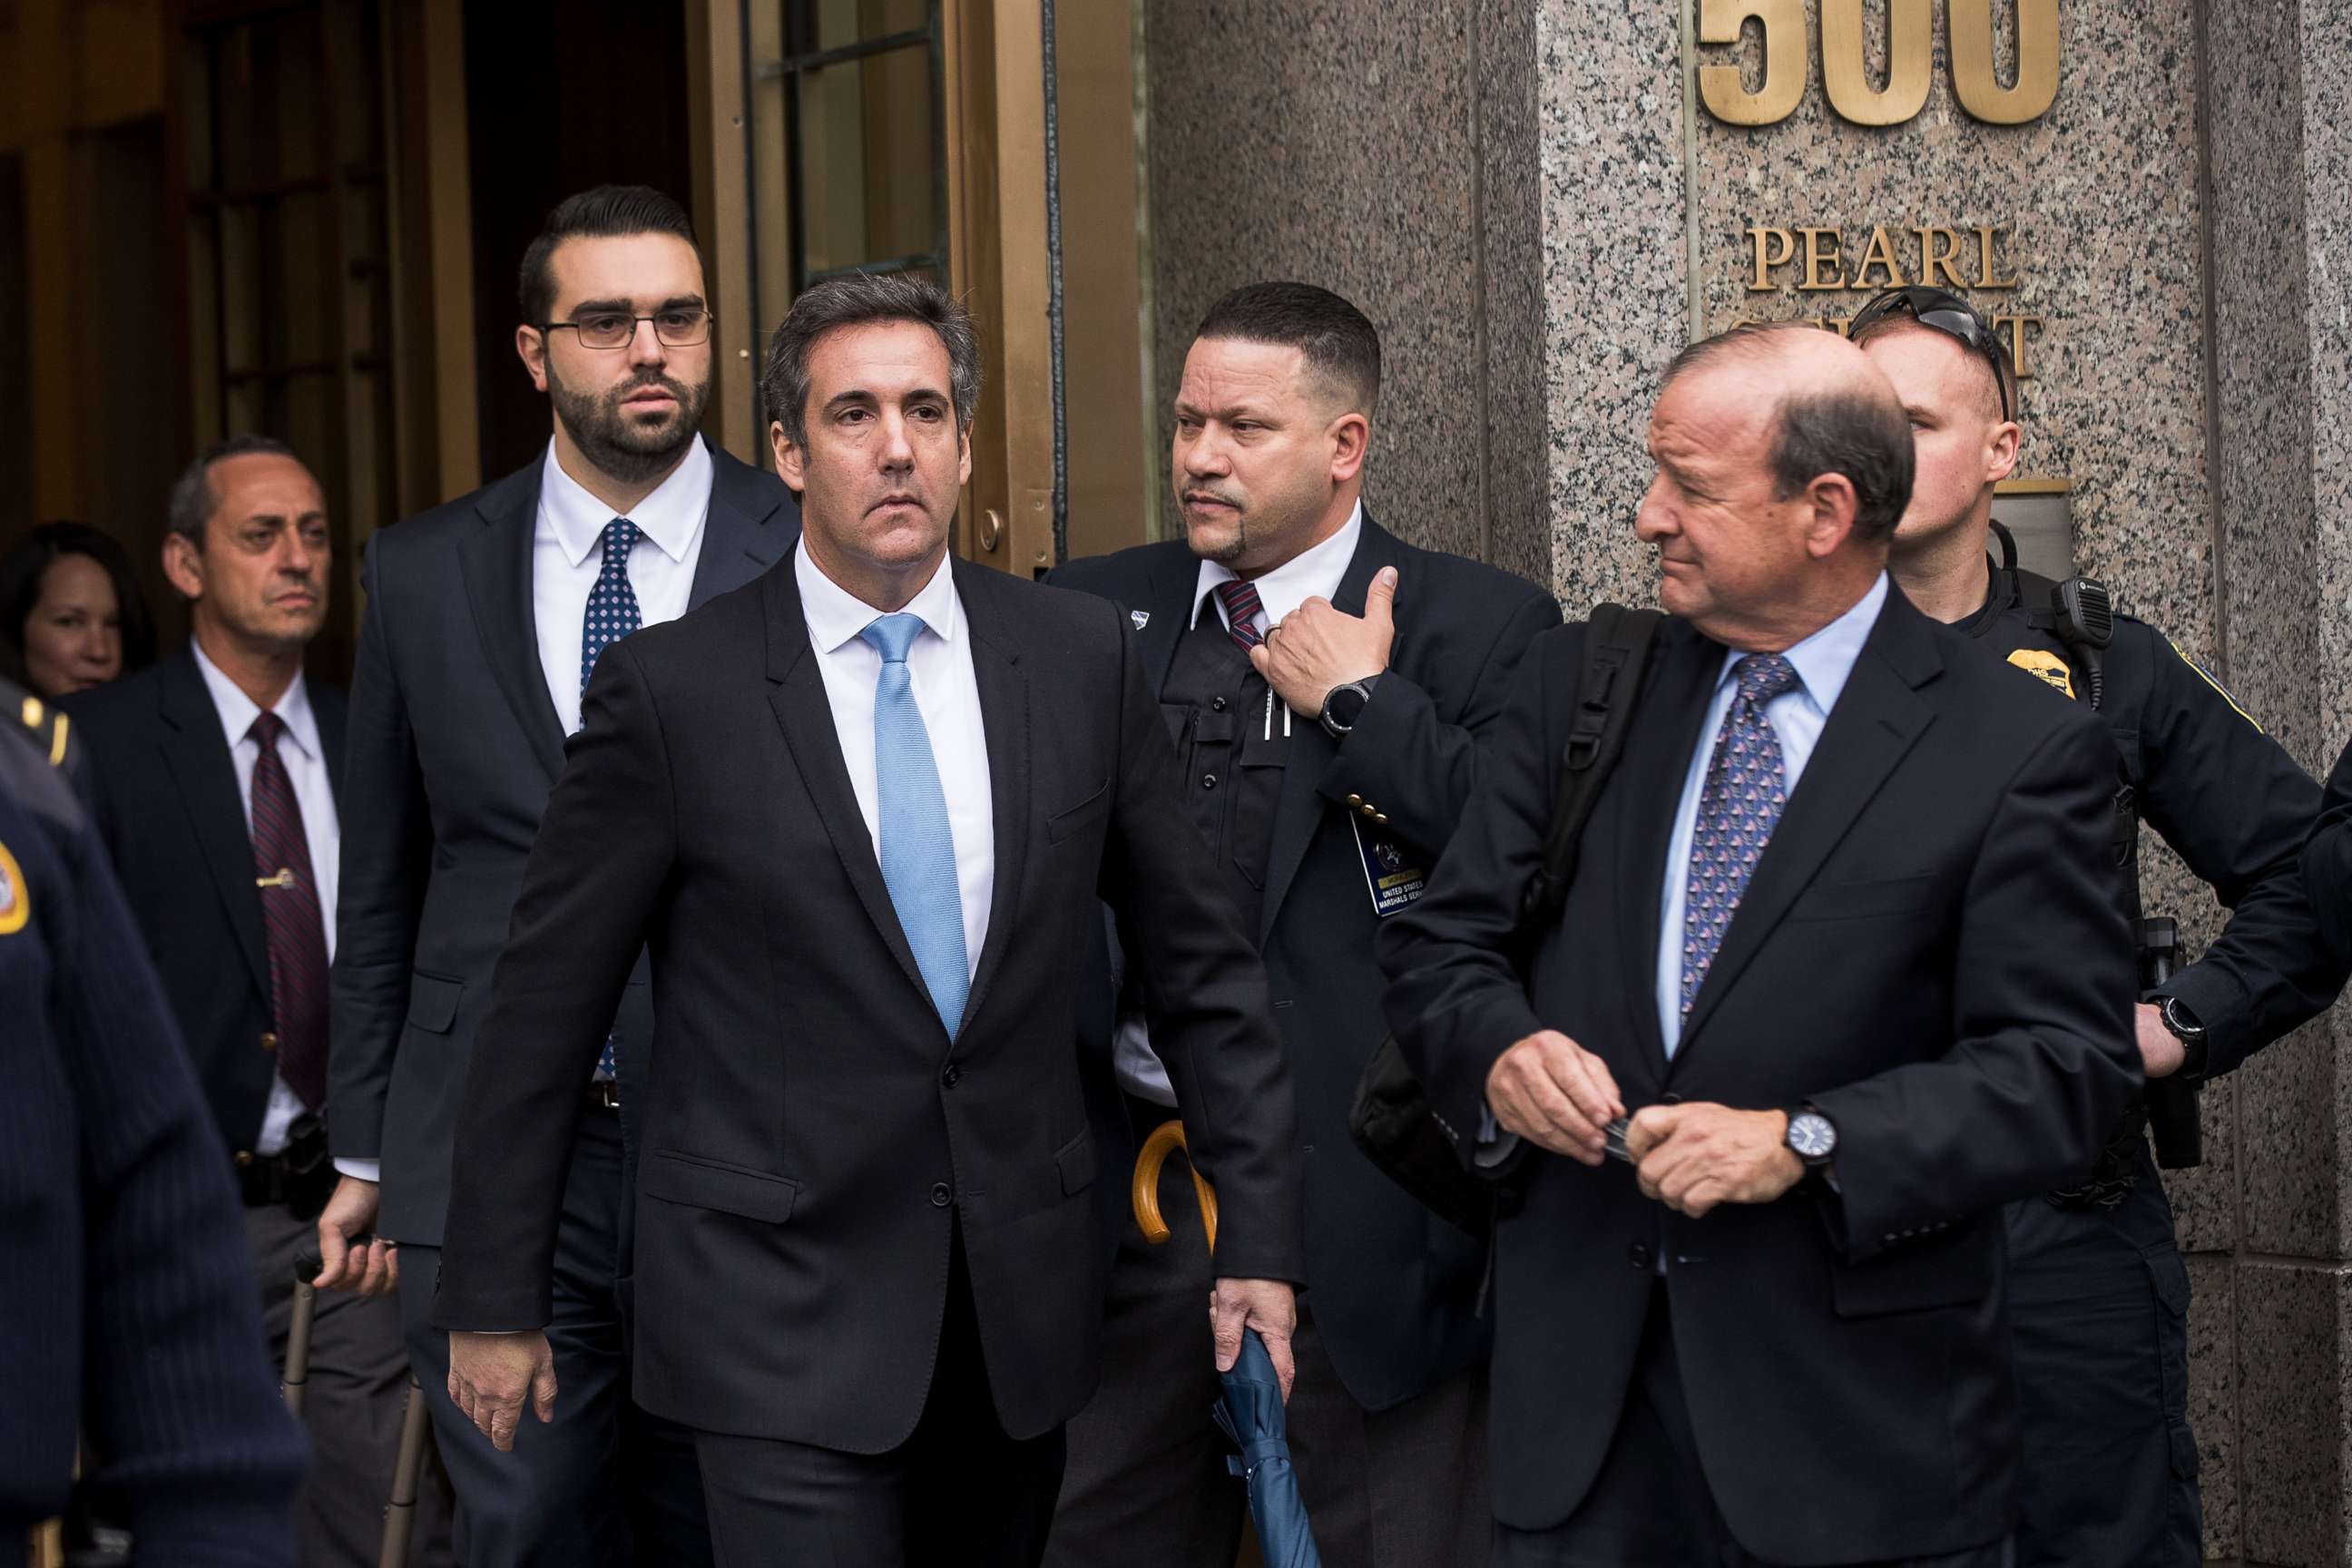 PHOTO: Michael Cohen, longtime personal lawyer and confidante for President Donald Trump, exits the United States District Court Southern District of New York, April 16, 2018, in New York City.